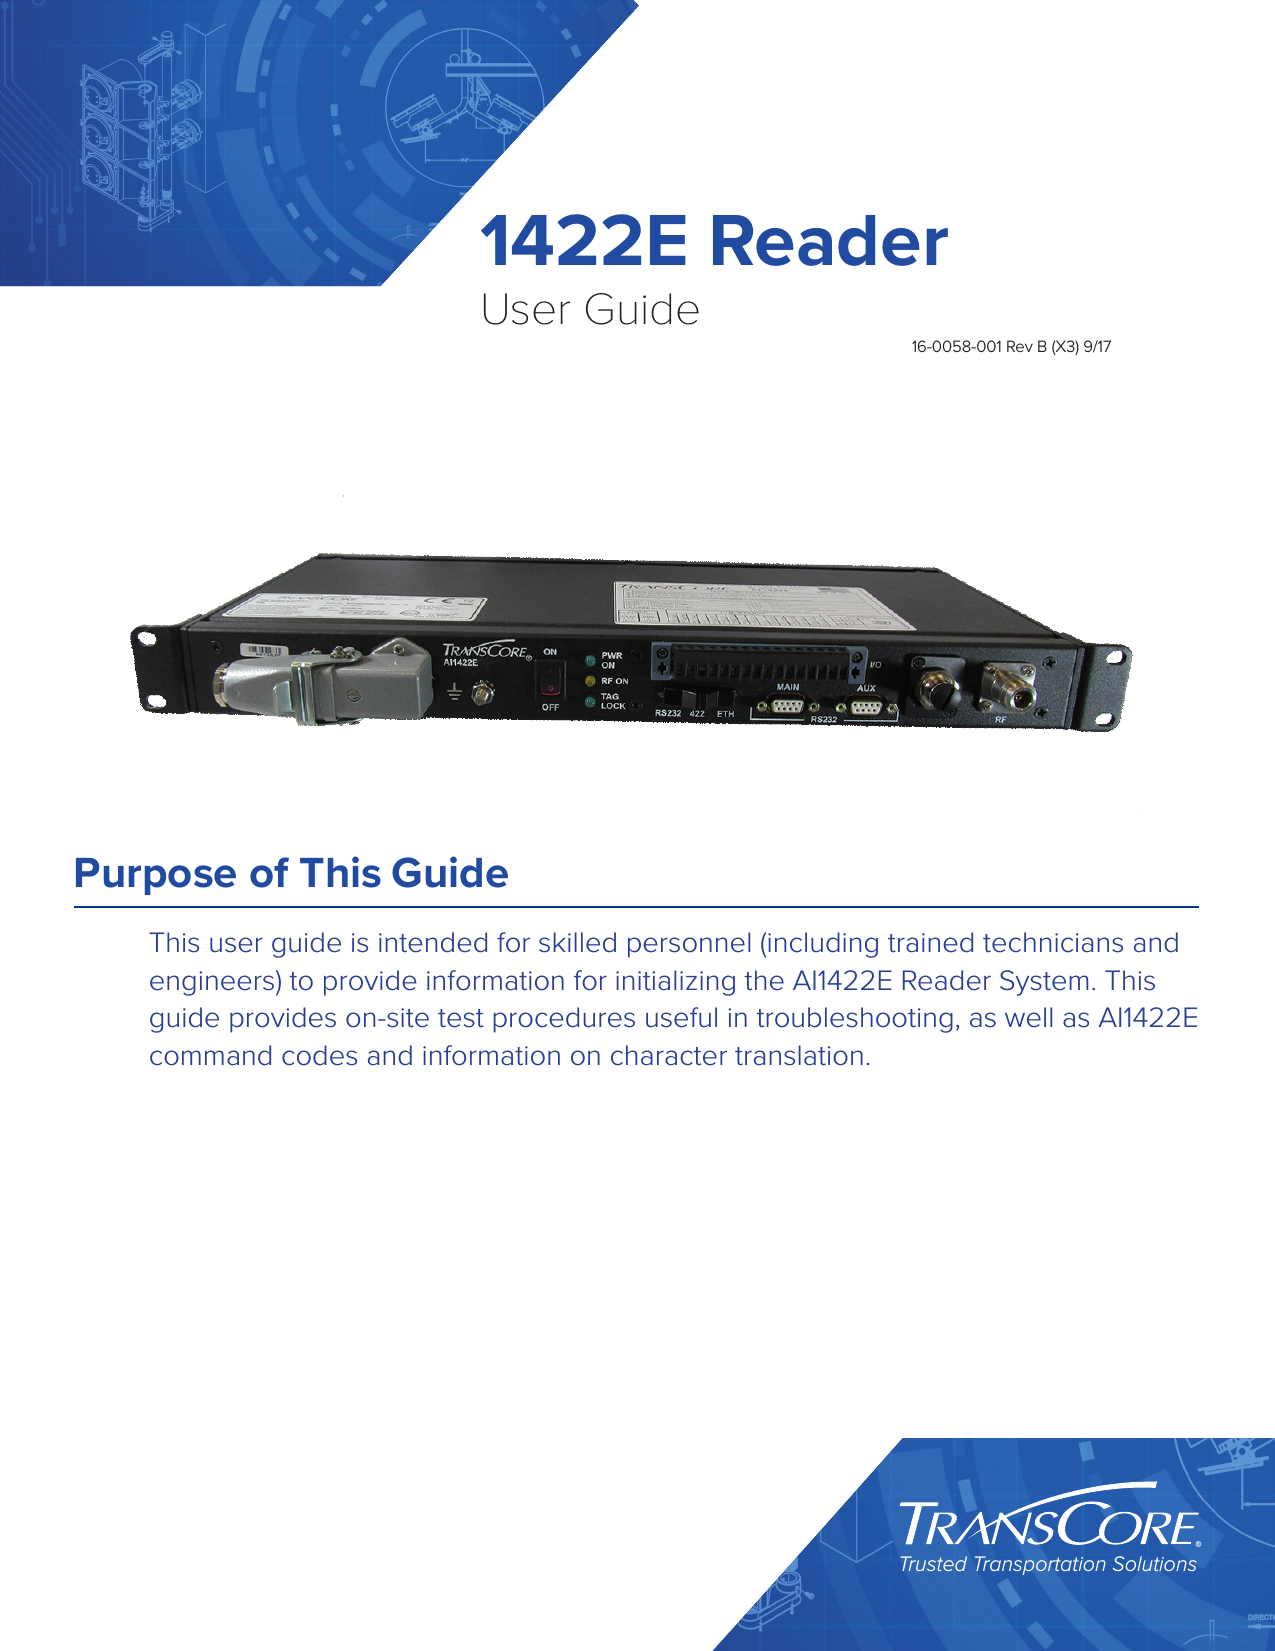 1422E ReaderUser GuideTrusted Transportation Solutions16-0058-001 Rev B (X3) 9/17Purpose of This GuideThis user guide is intended for skilled personnel (including trained technicians and engineers) to provide information for initializing the AI1422E Reader System. This guide provides on-site test procedures useful in troubleshooting, as well as AI1422E command codes and information on character translation.